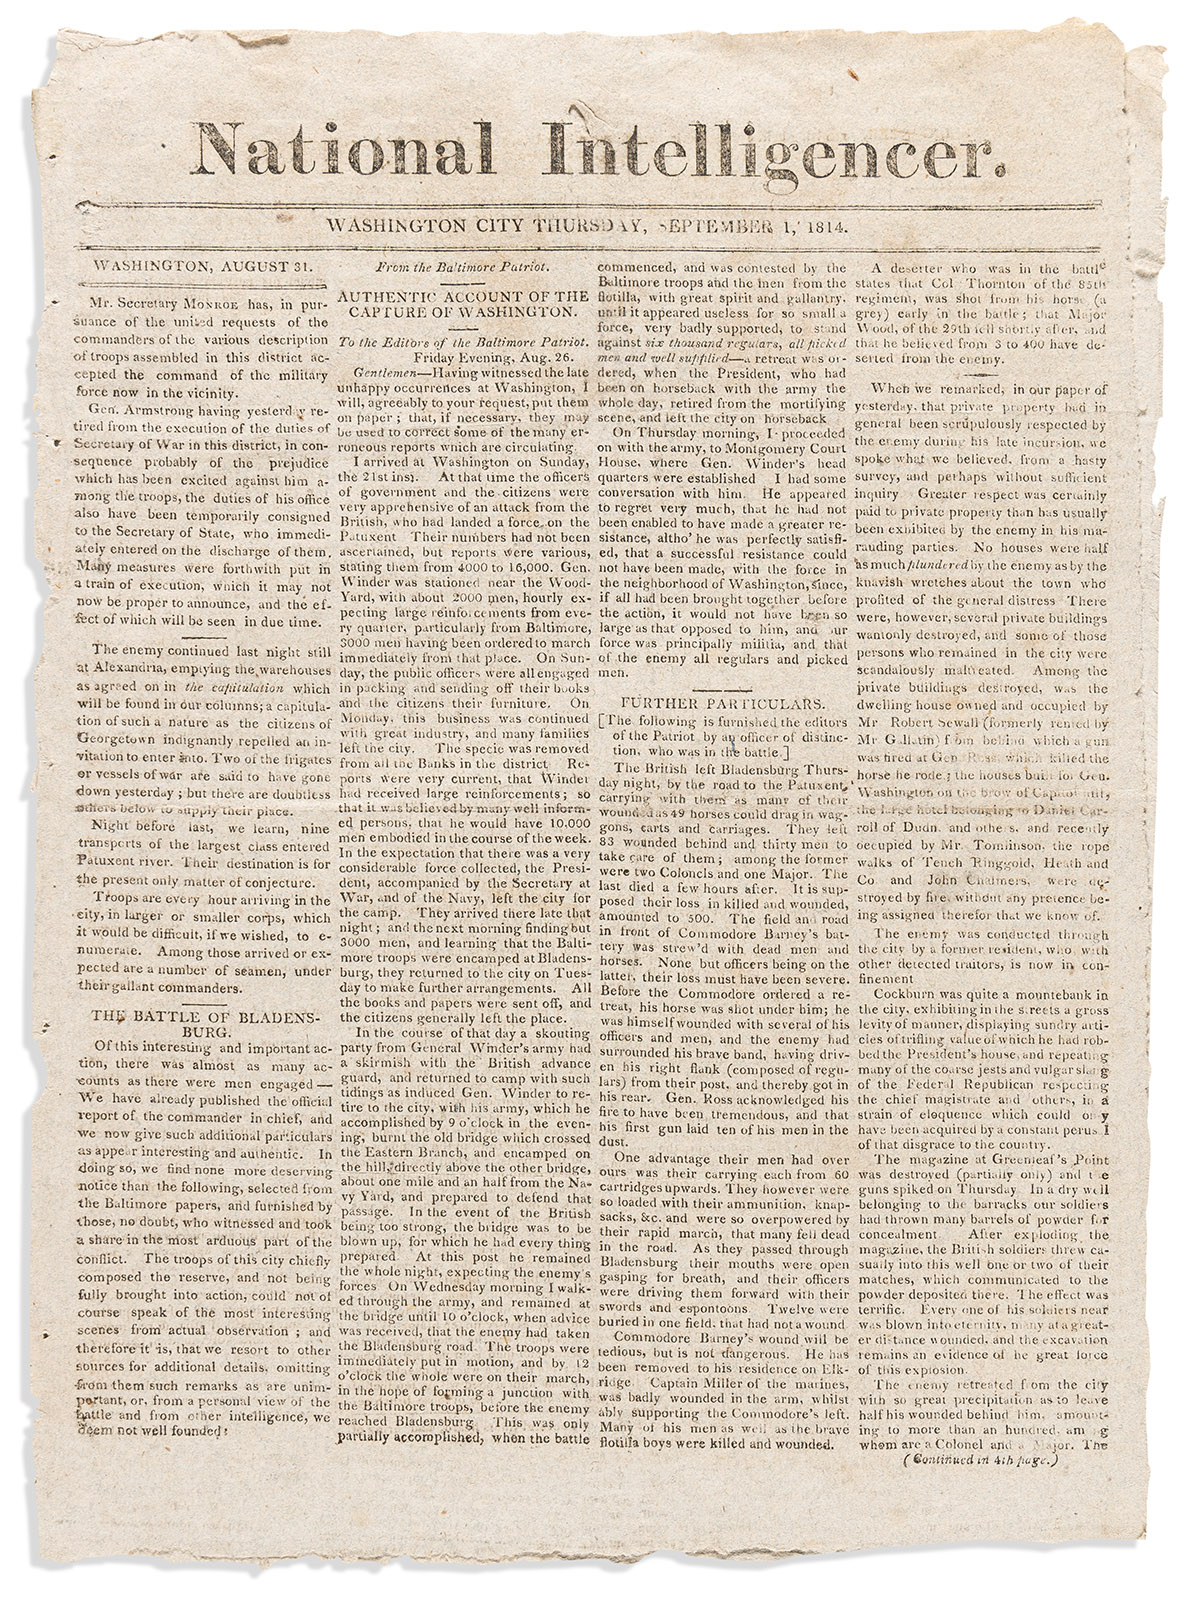 (WAR OF 1812.) Issue of the National Intelligencer describing the British invasion of Washington and its aftermath.